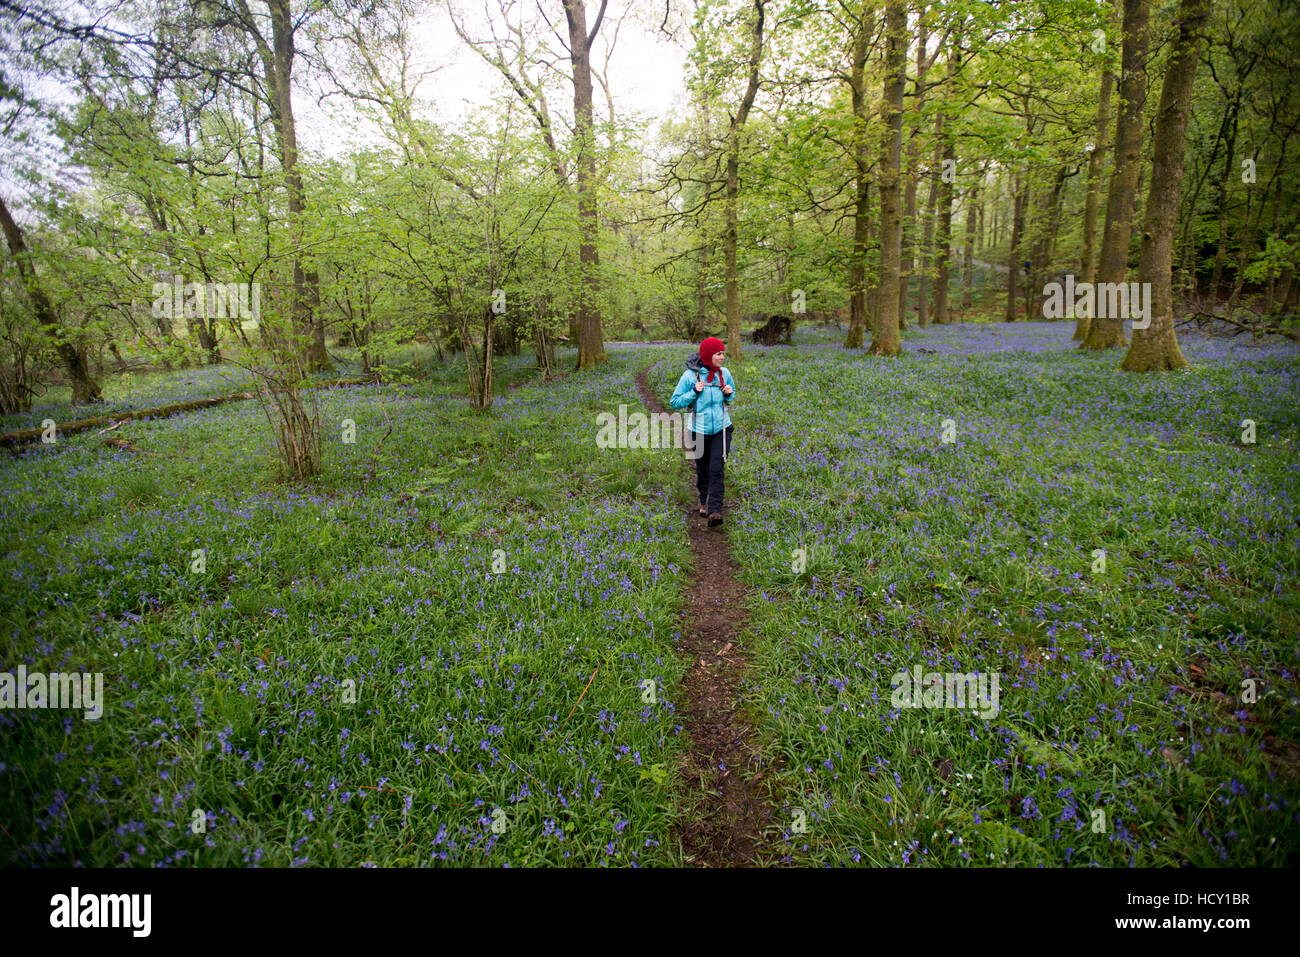 A woman walks through a forest surrounded by bluebells near Grasmere, Lake District, Cumbria, UK Stock Photo